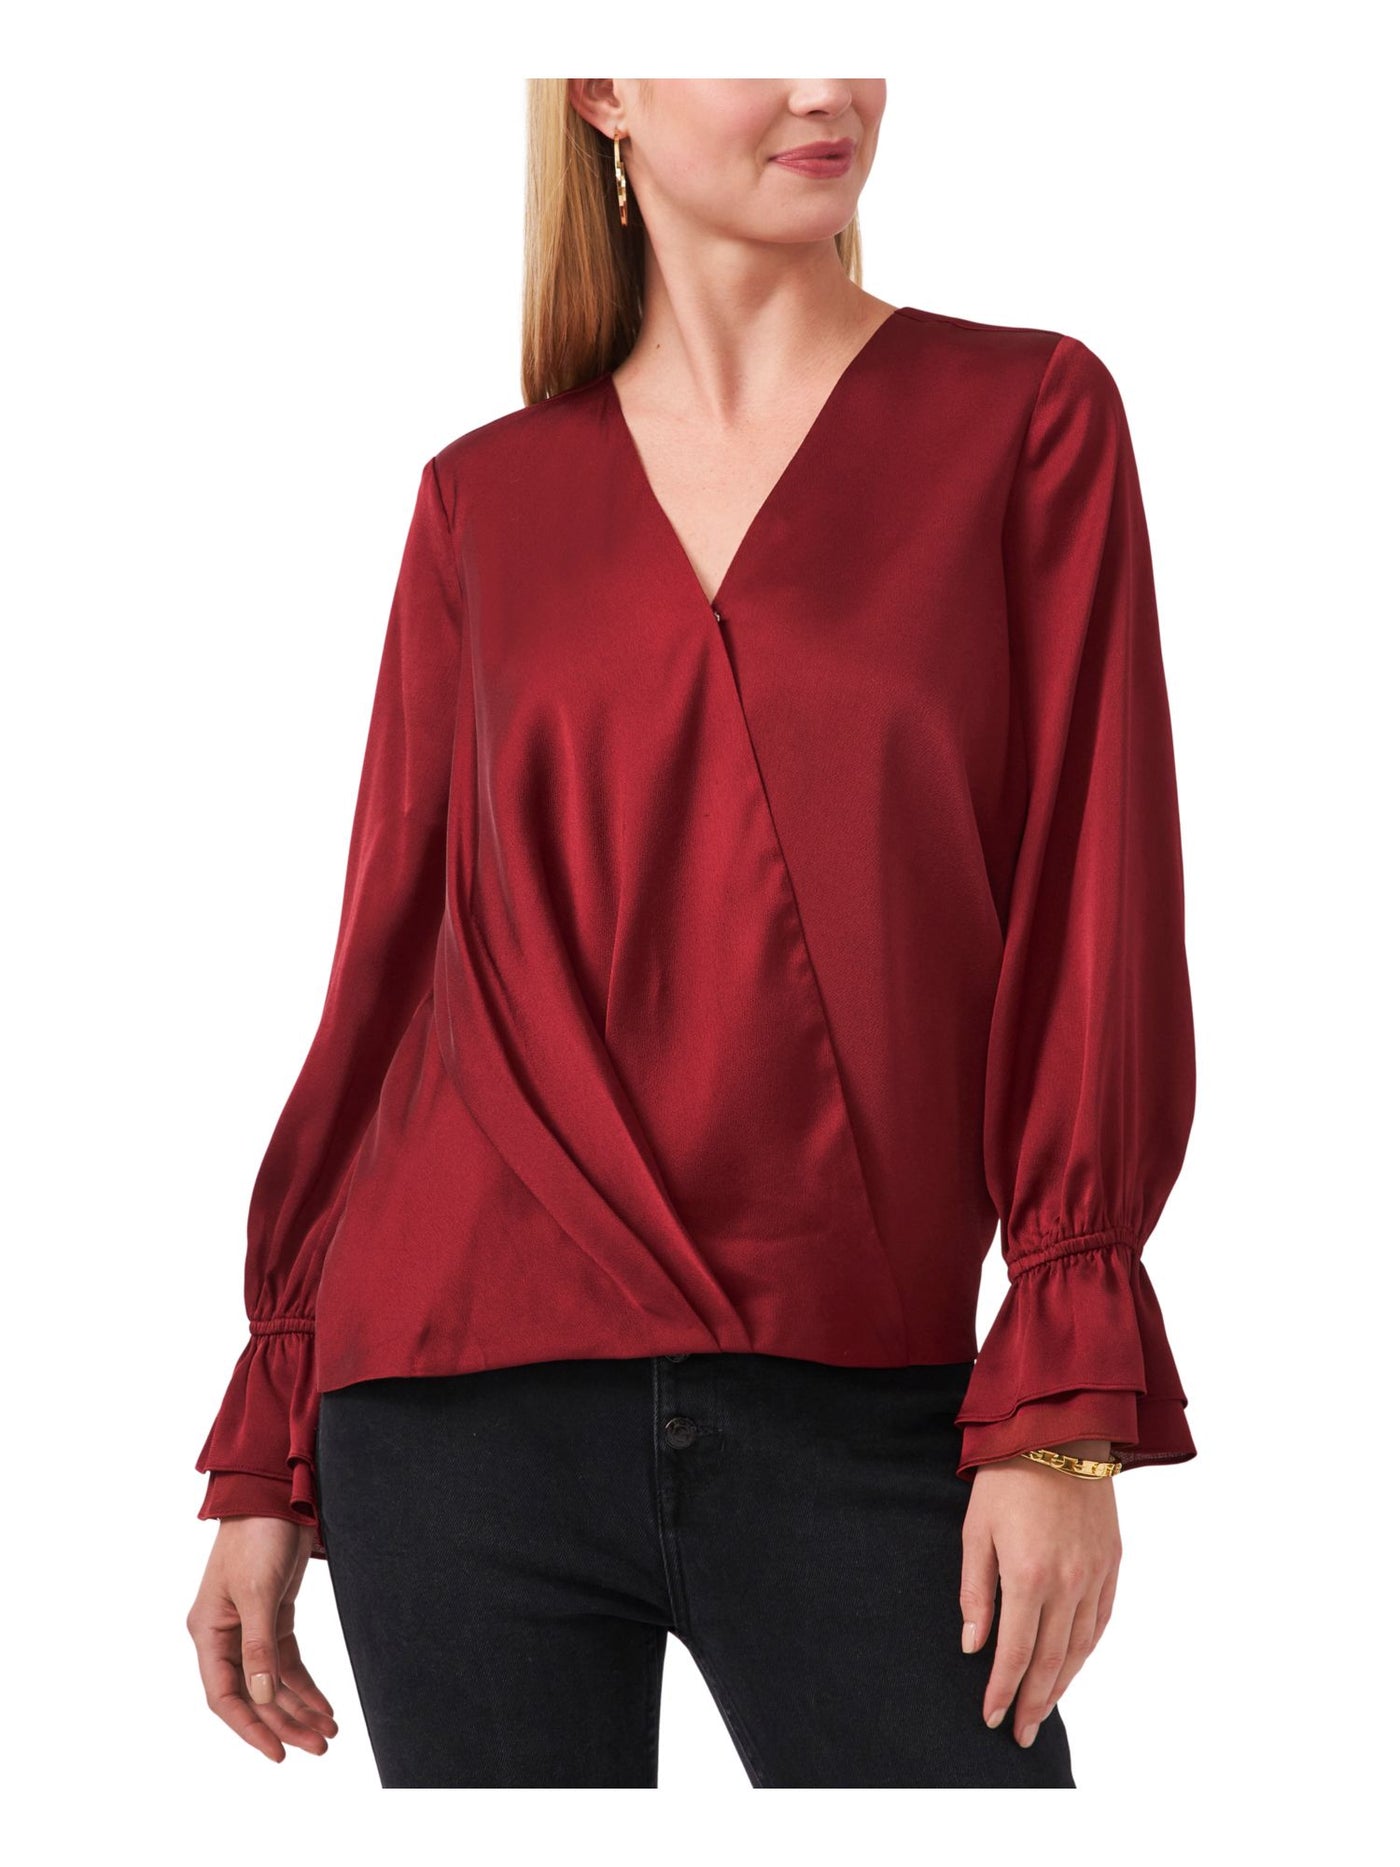 VINCE CAMUTO Womens Red Pleated Ruffled-cuff Step Hem Long Sleeve Surplice Neckline Wear To Work Faux Wrap Top M